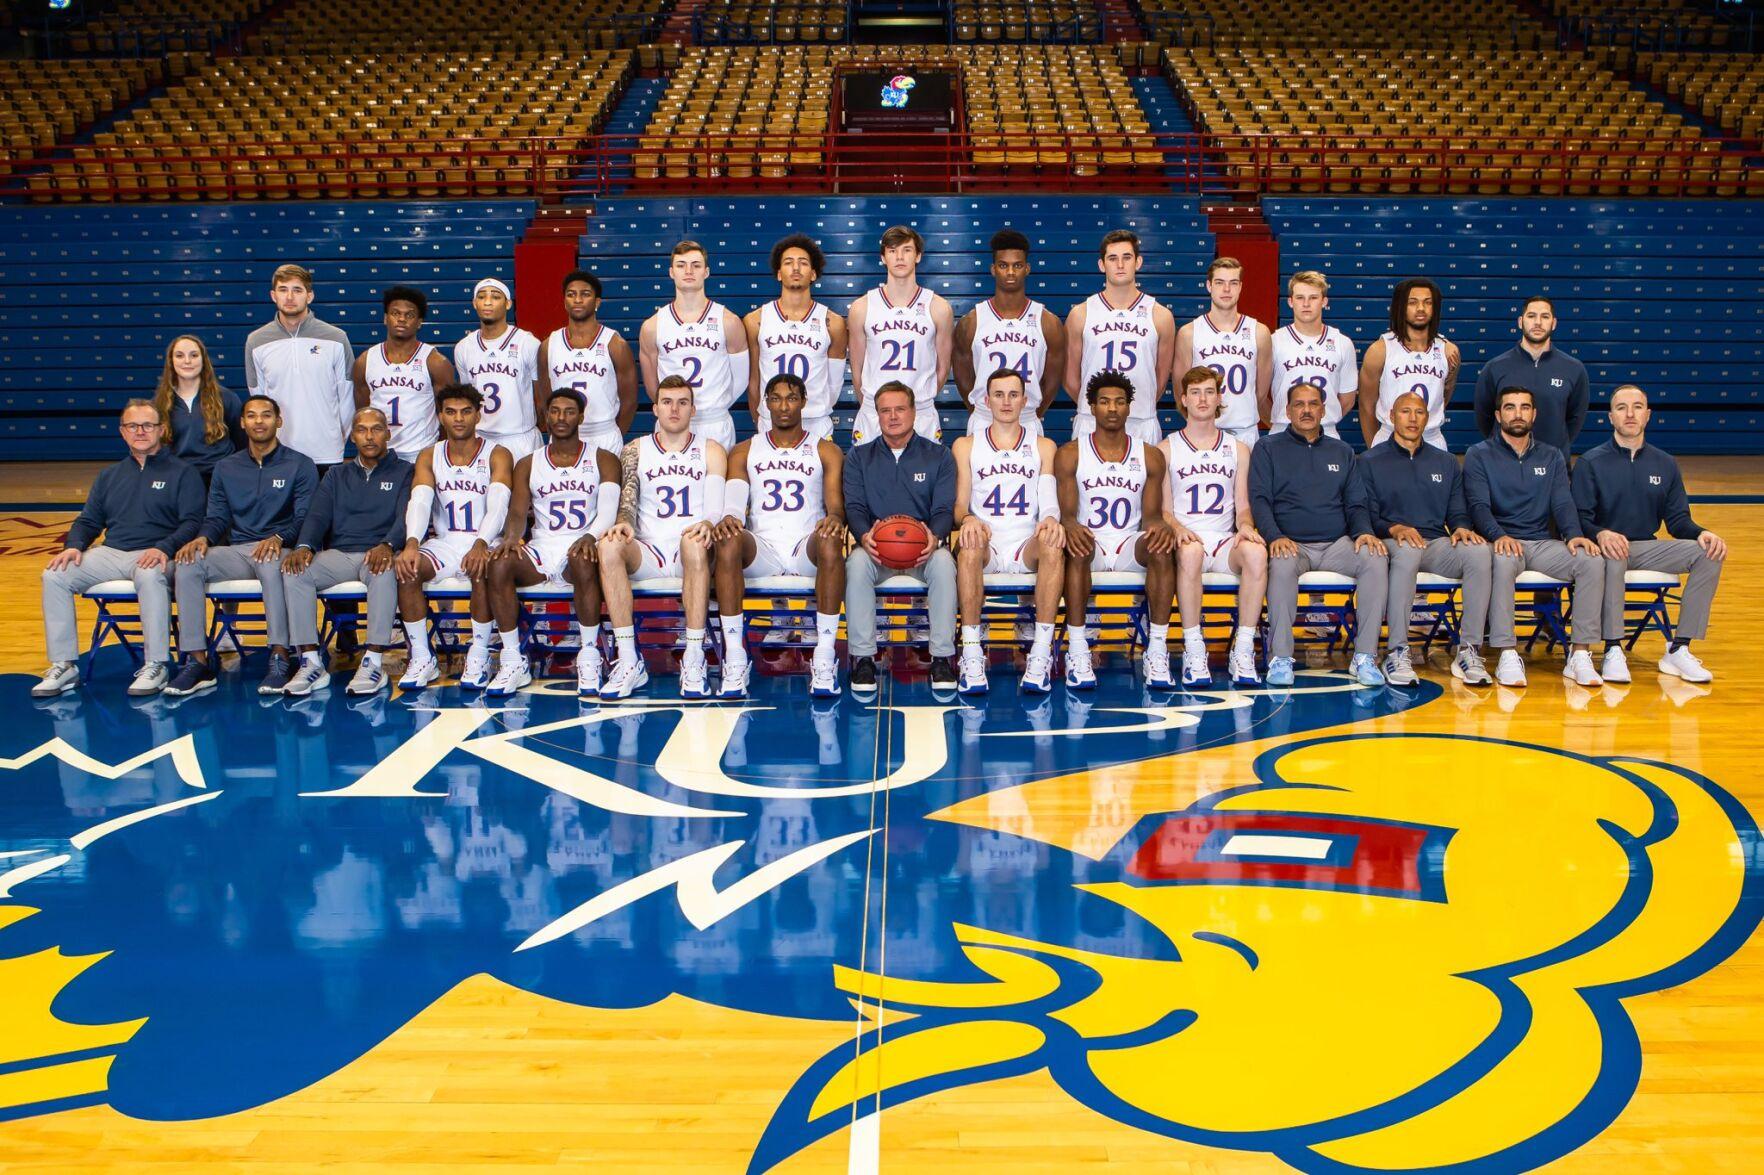 Playing team basketball is a priority for Kansas hoops this season